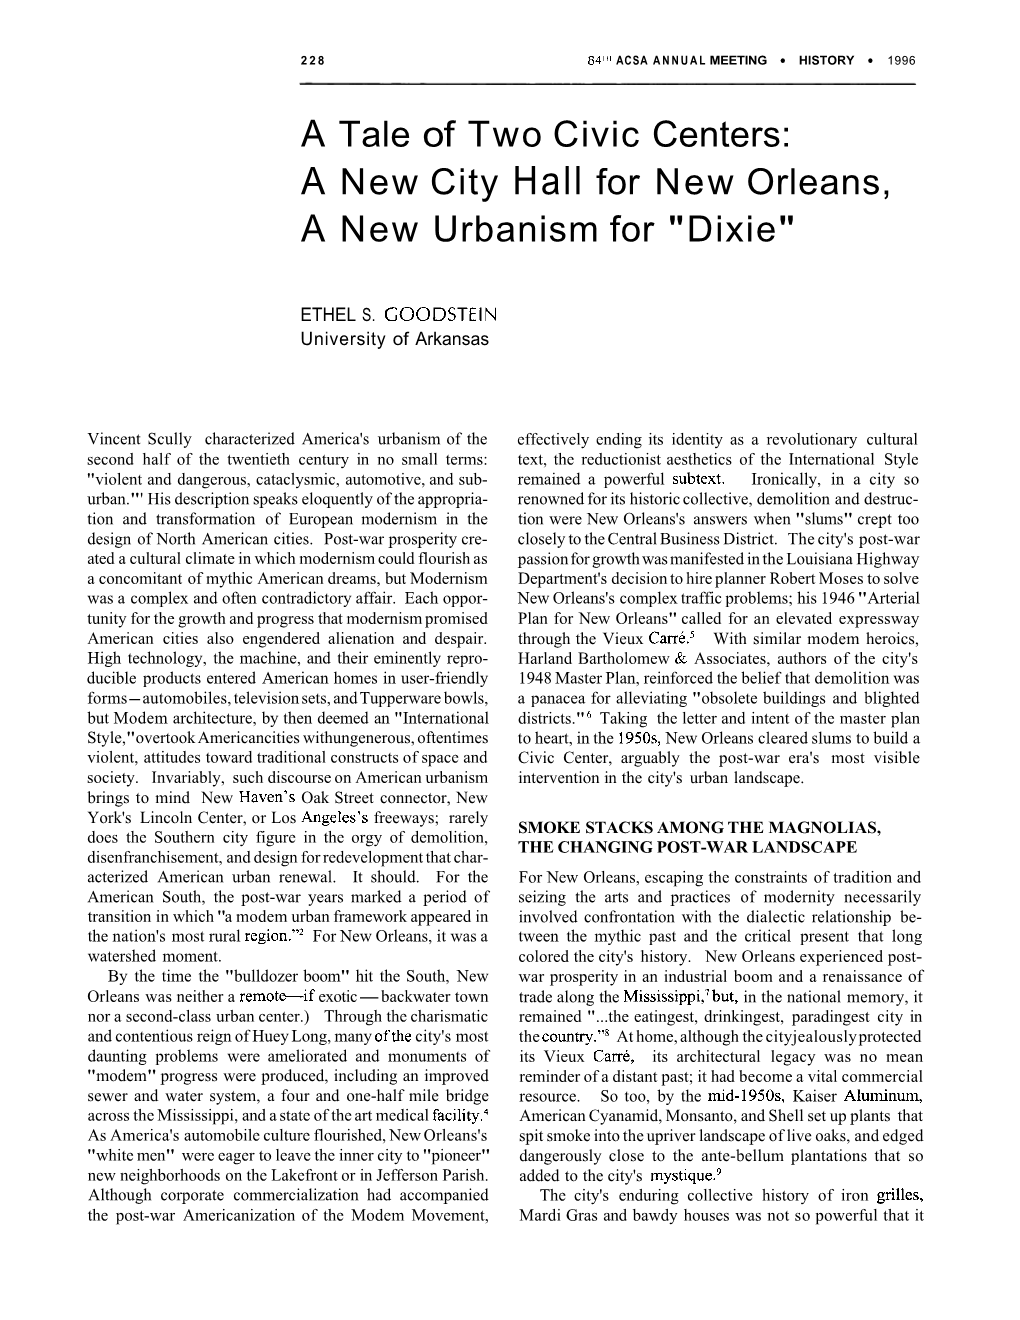 A New City Hall for New Orleans, a New Urbanism for "Dixie"